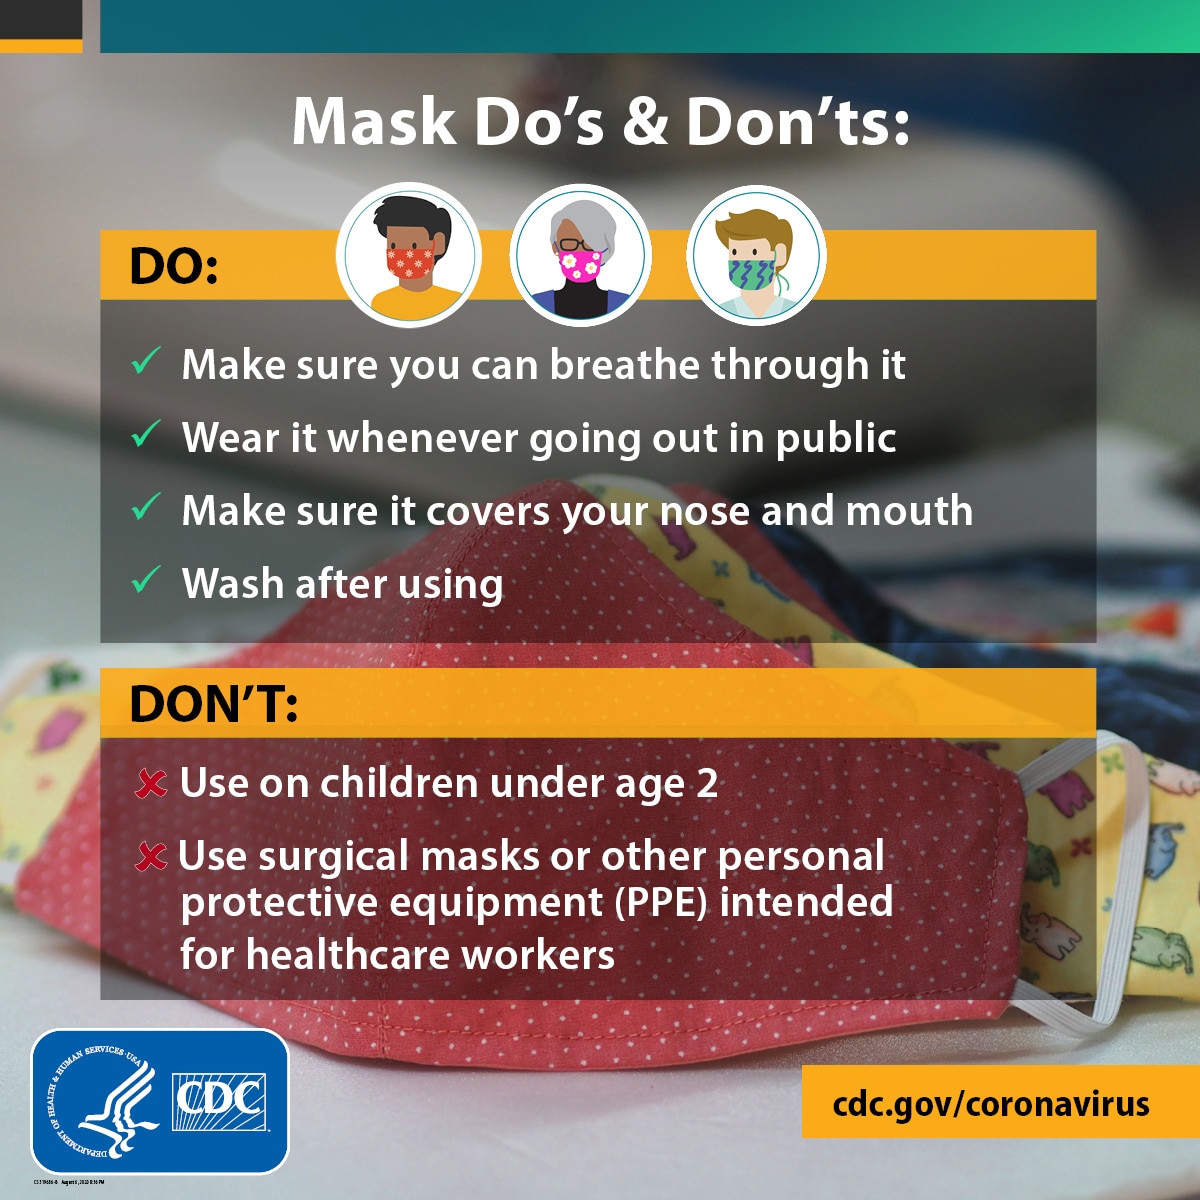 Face covering do's and don'ts.